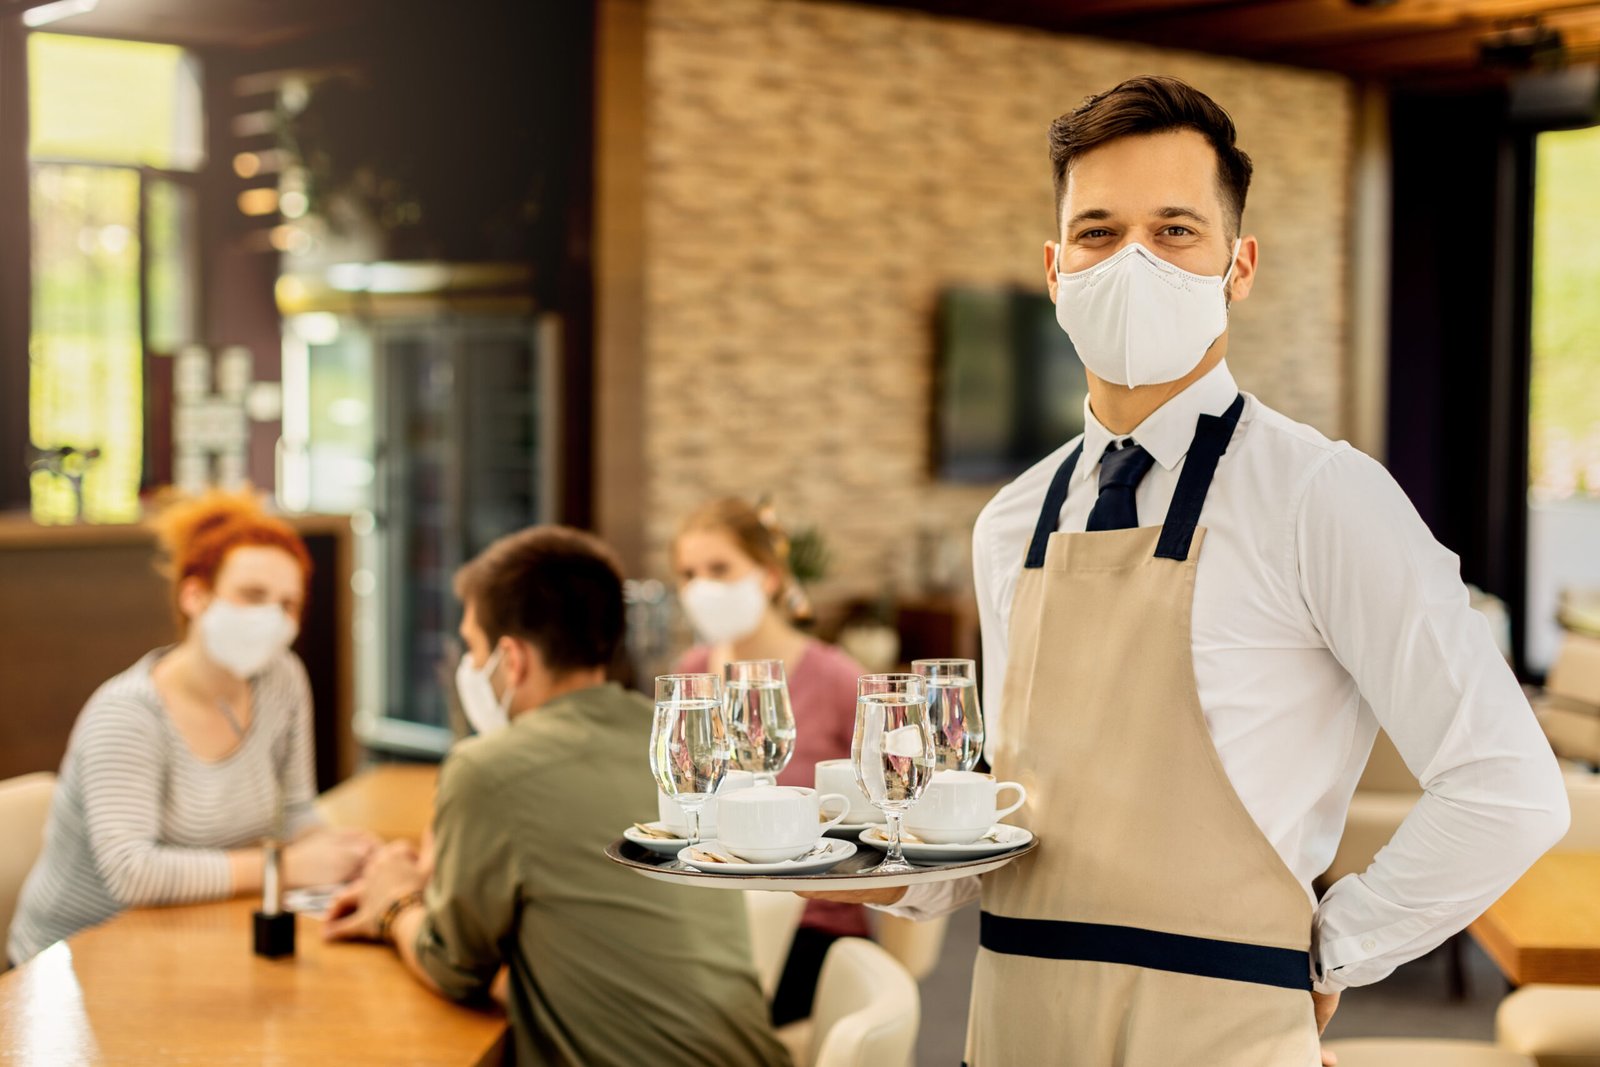 Portrait of happy waiter with protective face mask serving customers in a cafe and looking at camera.